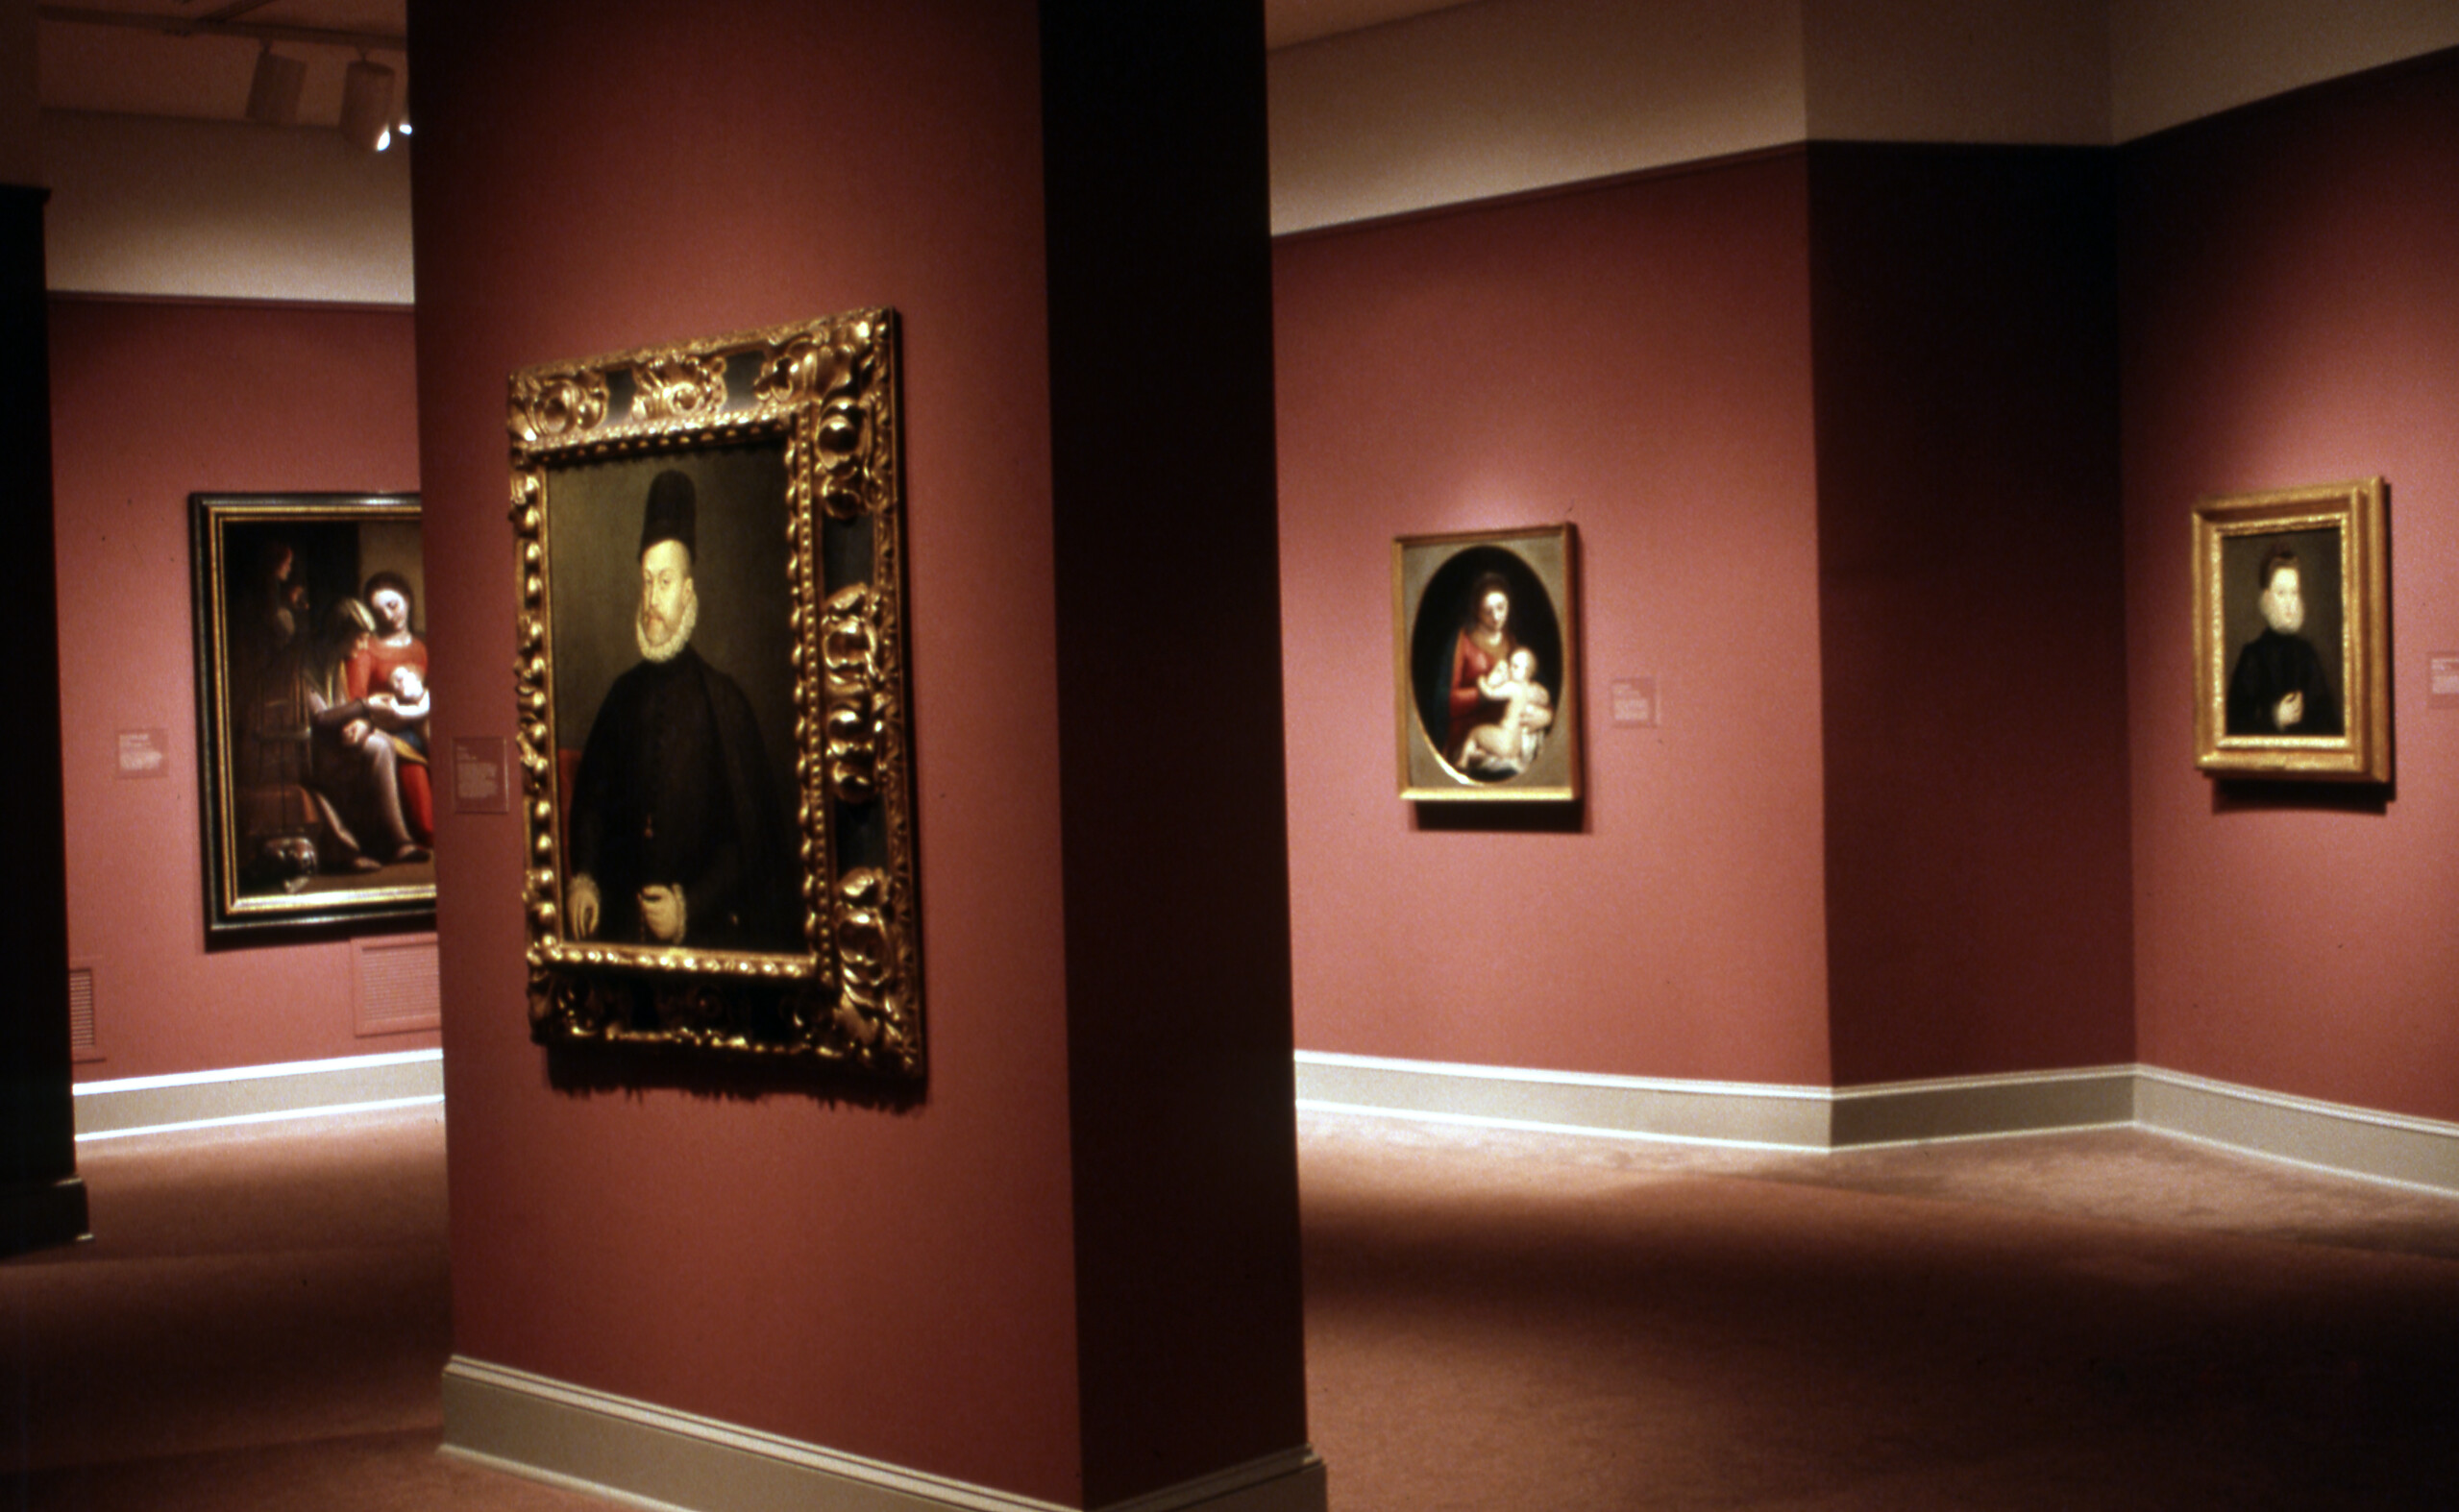 A view of a gallery space with dark red walls. On each wall, a painting is hanging. The paintings are portraits as well as biblical scenes.